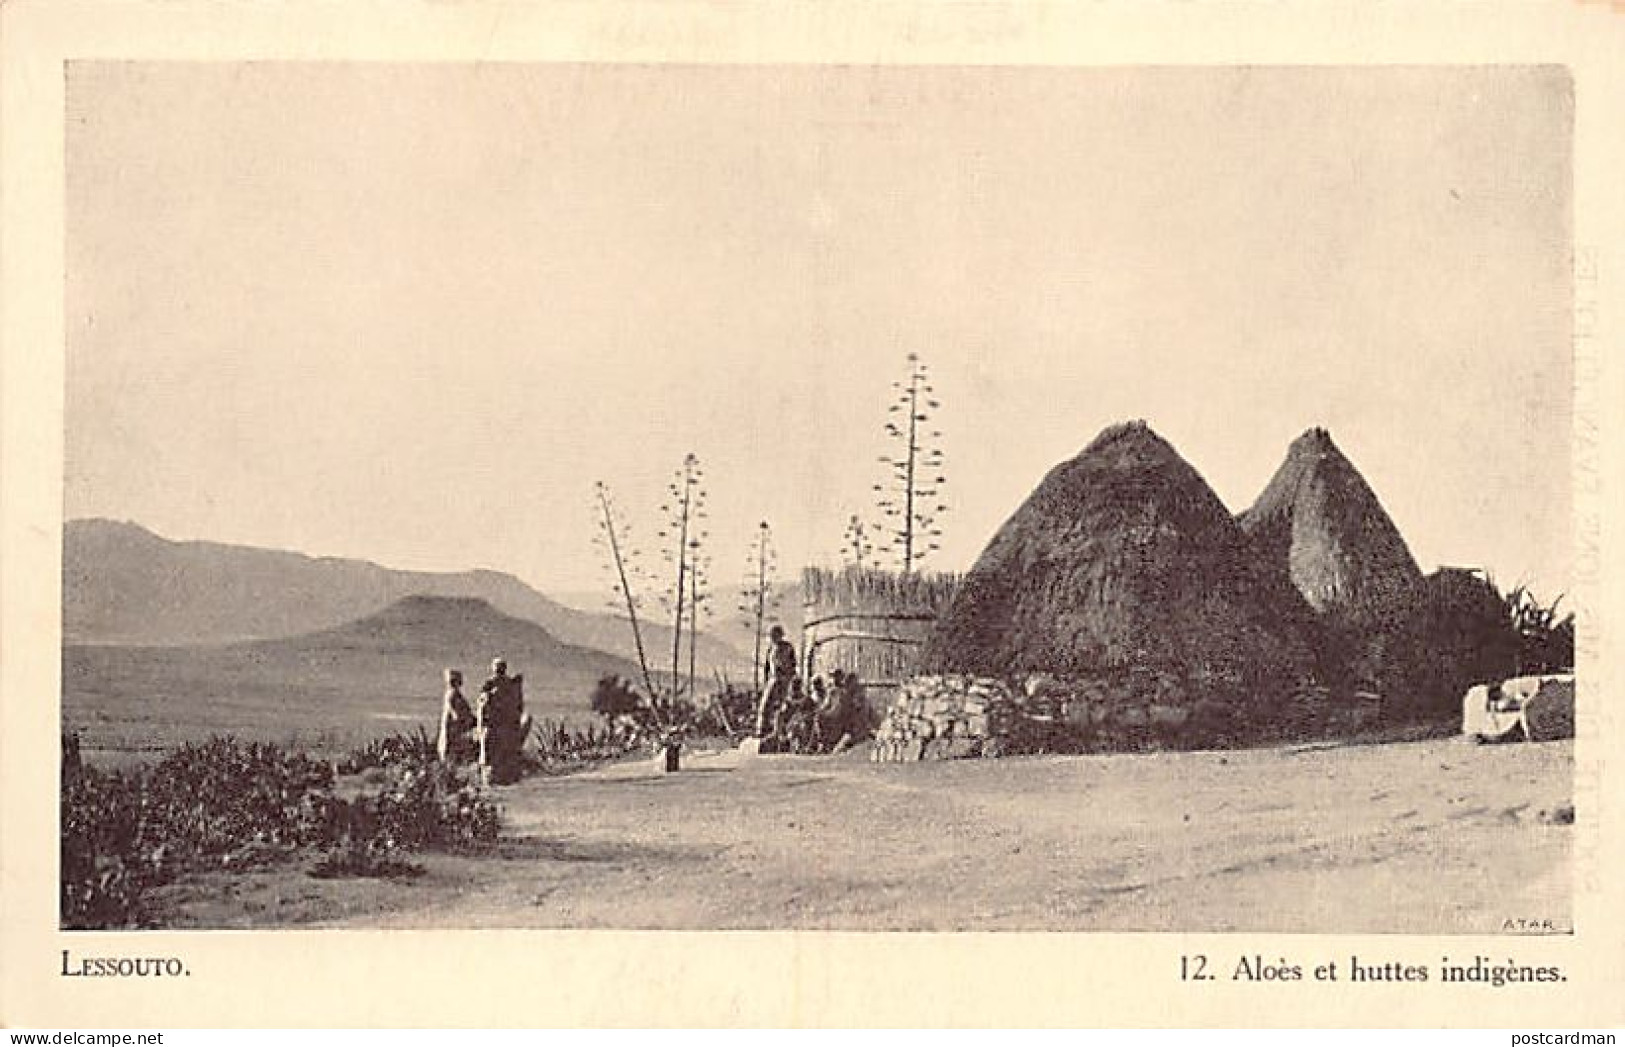 Lesotho - Aloe And Native Huts - Publ. Society Of Evangelical Missions - Morija Book Depository  - Lesotho